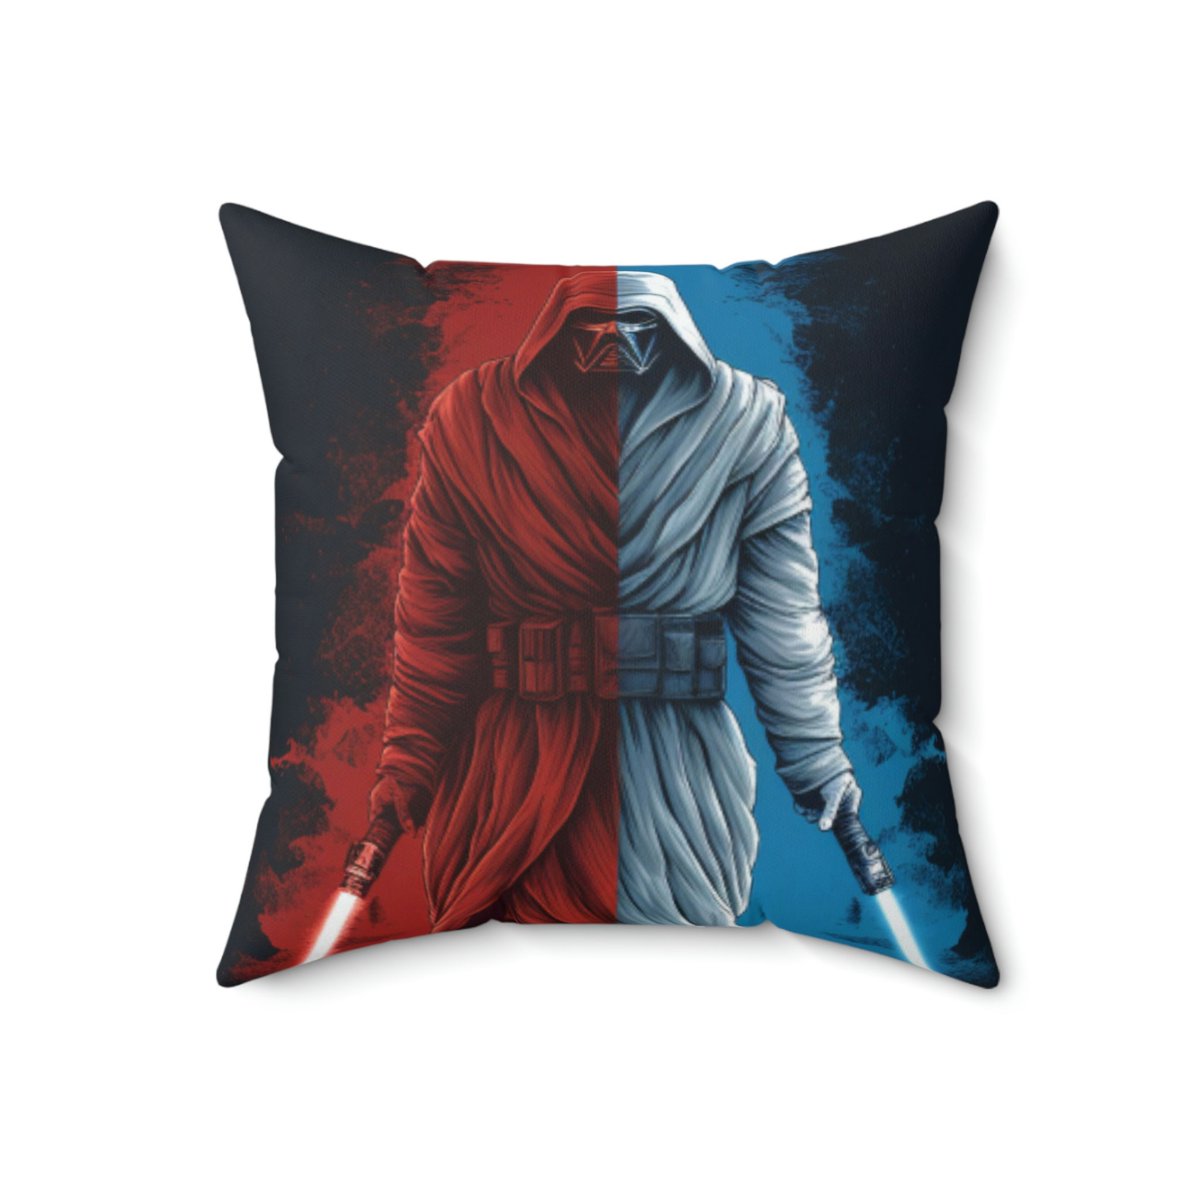 Excited to share the latest addition to my #etsy shop: Jedi and Sith Pillow, Star Wars Square Pillow, Decorative Pillow, Custom Pillow, Room Decor, House Pillow, Gift, Double-Sided Printing etsy.me/3M6ZM7q #squarepillow #decorativepillow #pillow #homedecor #pol